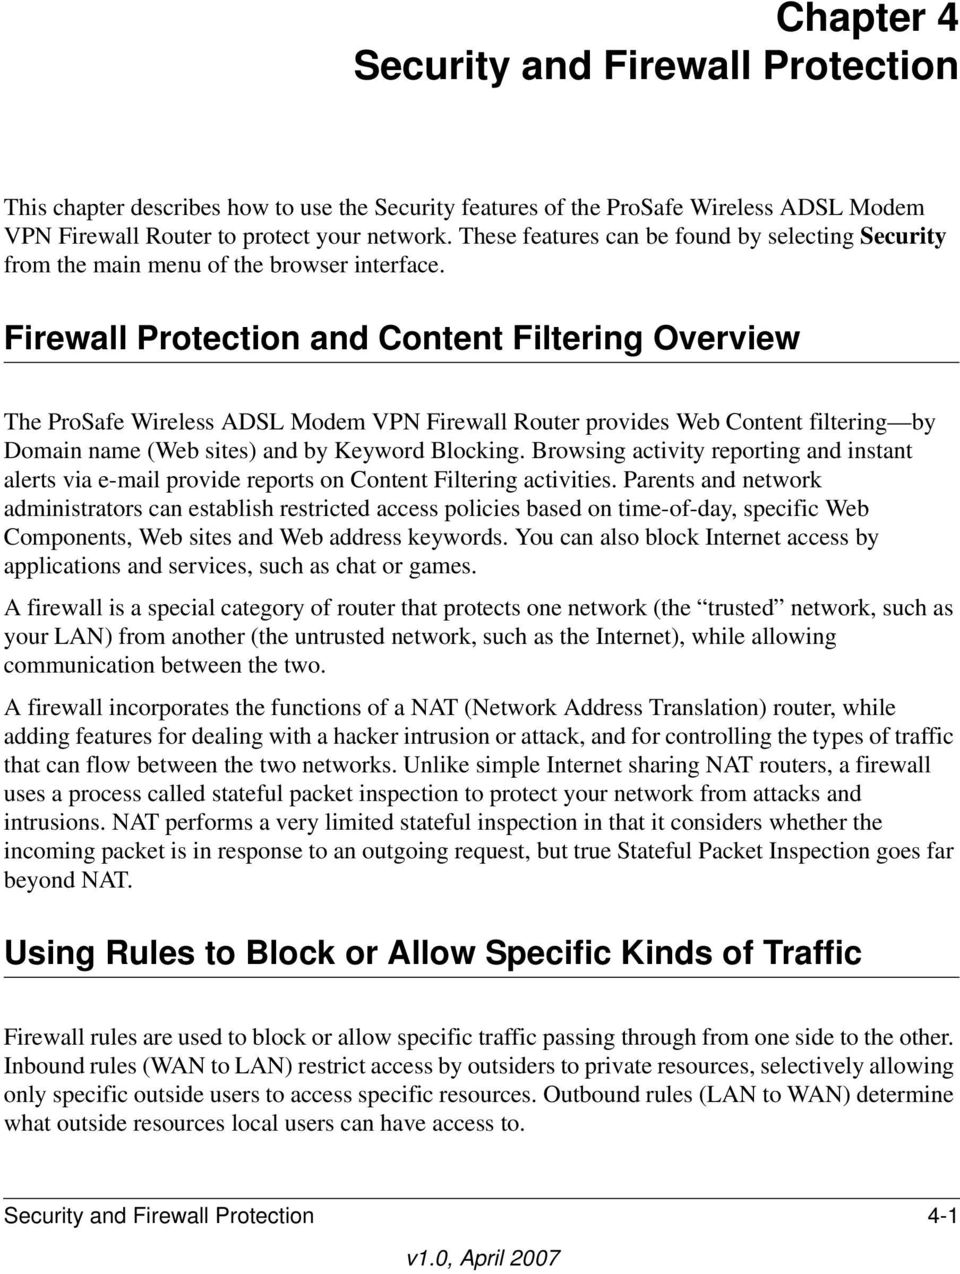 Firewall Protection and Content Filtering Overview The ProSafe Wireless ADSL Modem VPN Firewall Router provides Web Content filtering by Domain name (Web sites) and by Keyword Blocking.